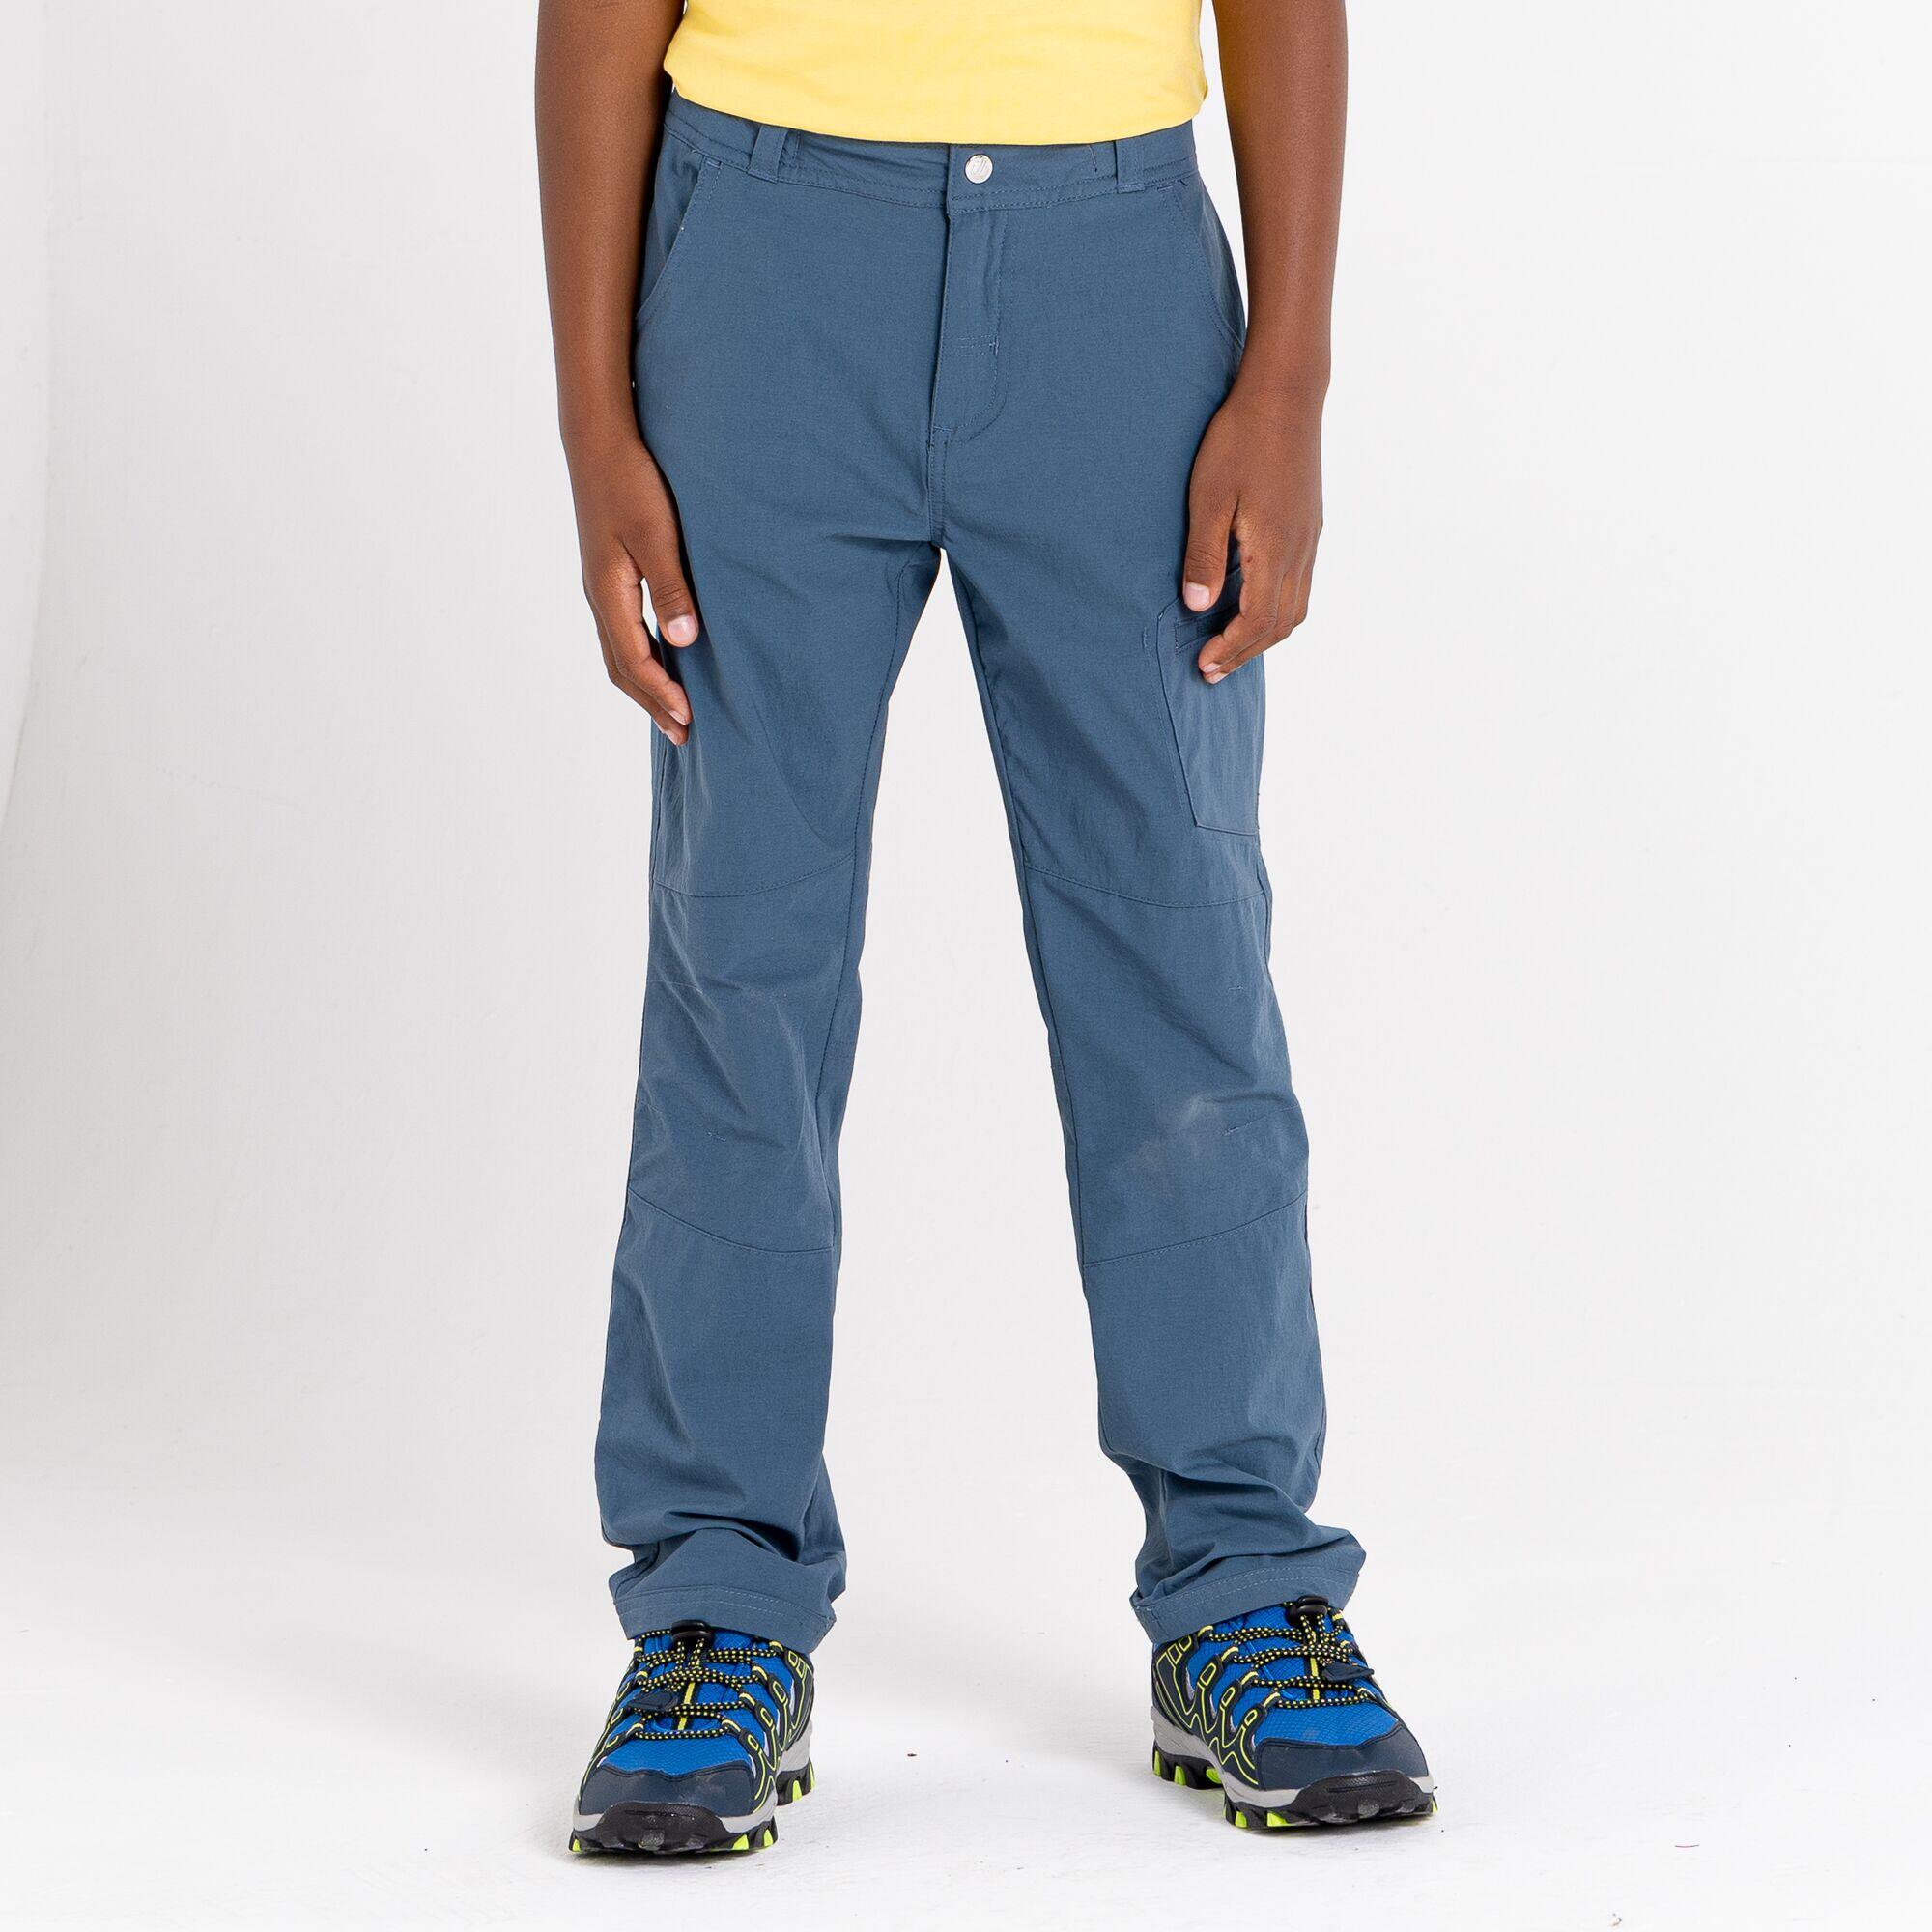 Reprise II Kids Hiking Trousers - Blue Orion Grey 2/5